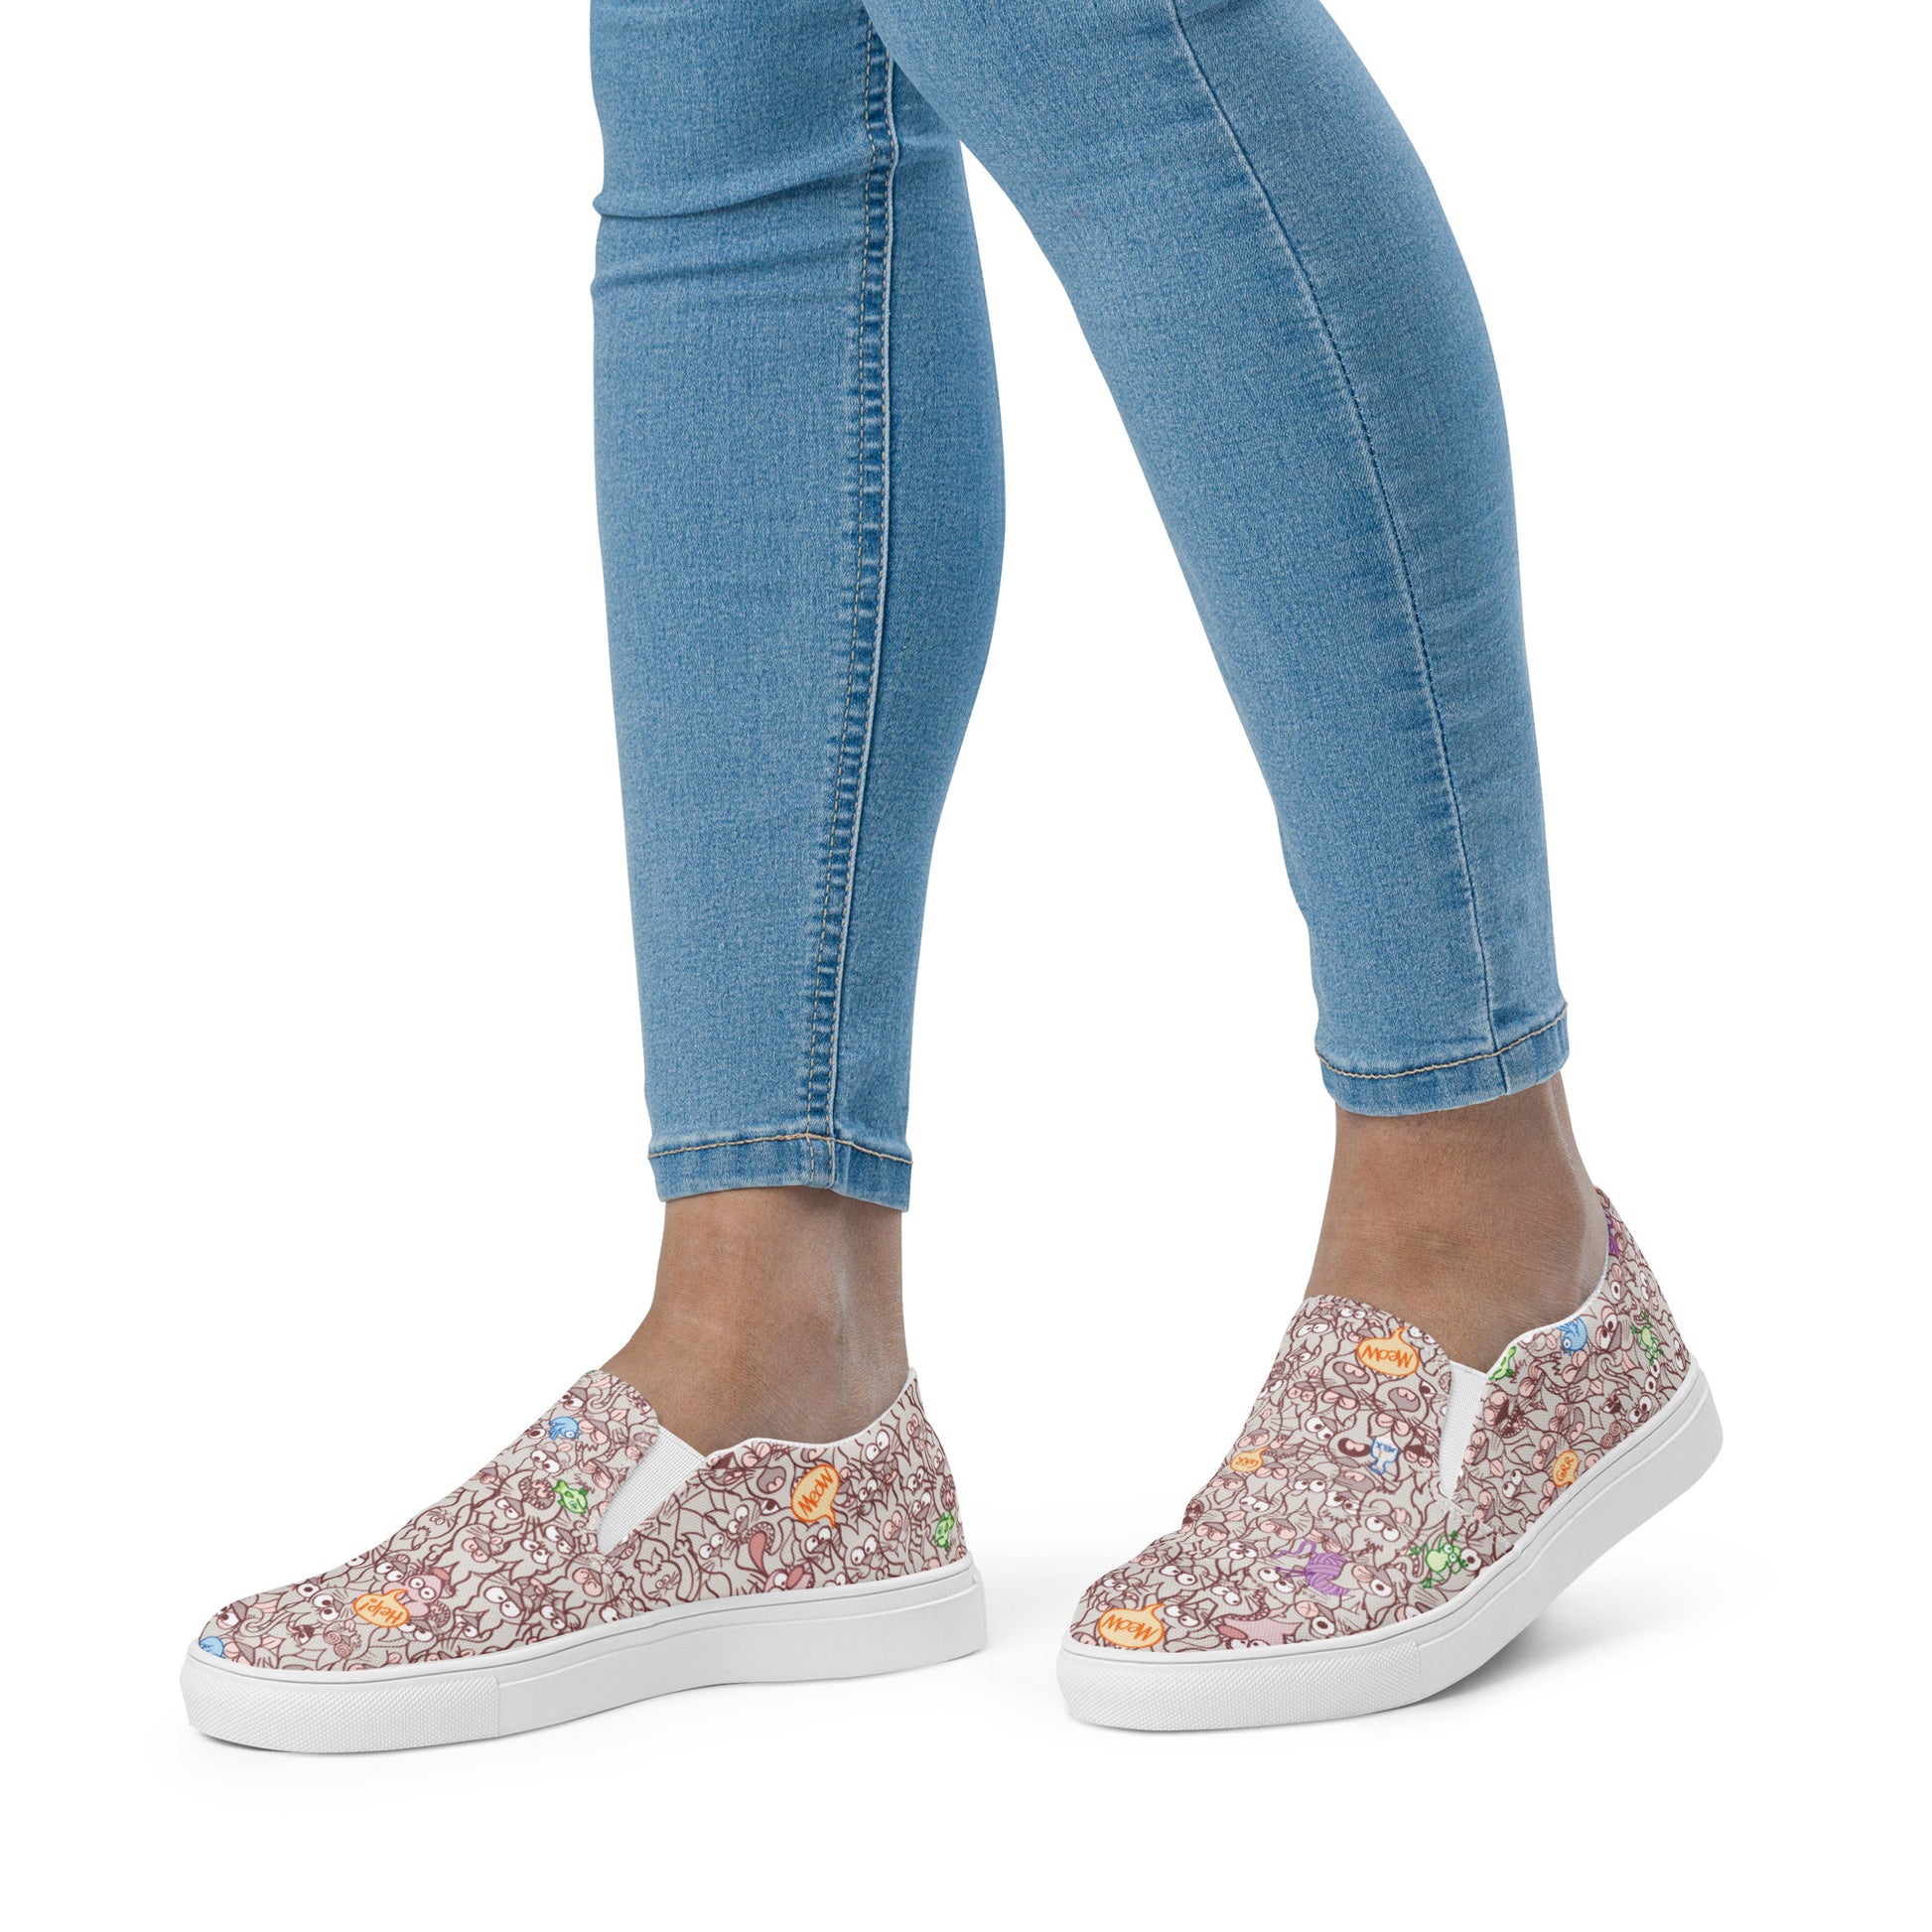 Exclusive design only for real cat lovers Women’s slip-on canvas shoes. Lifestyle